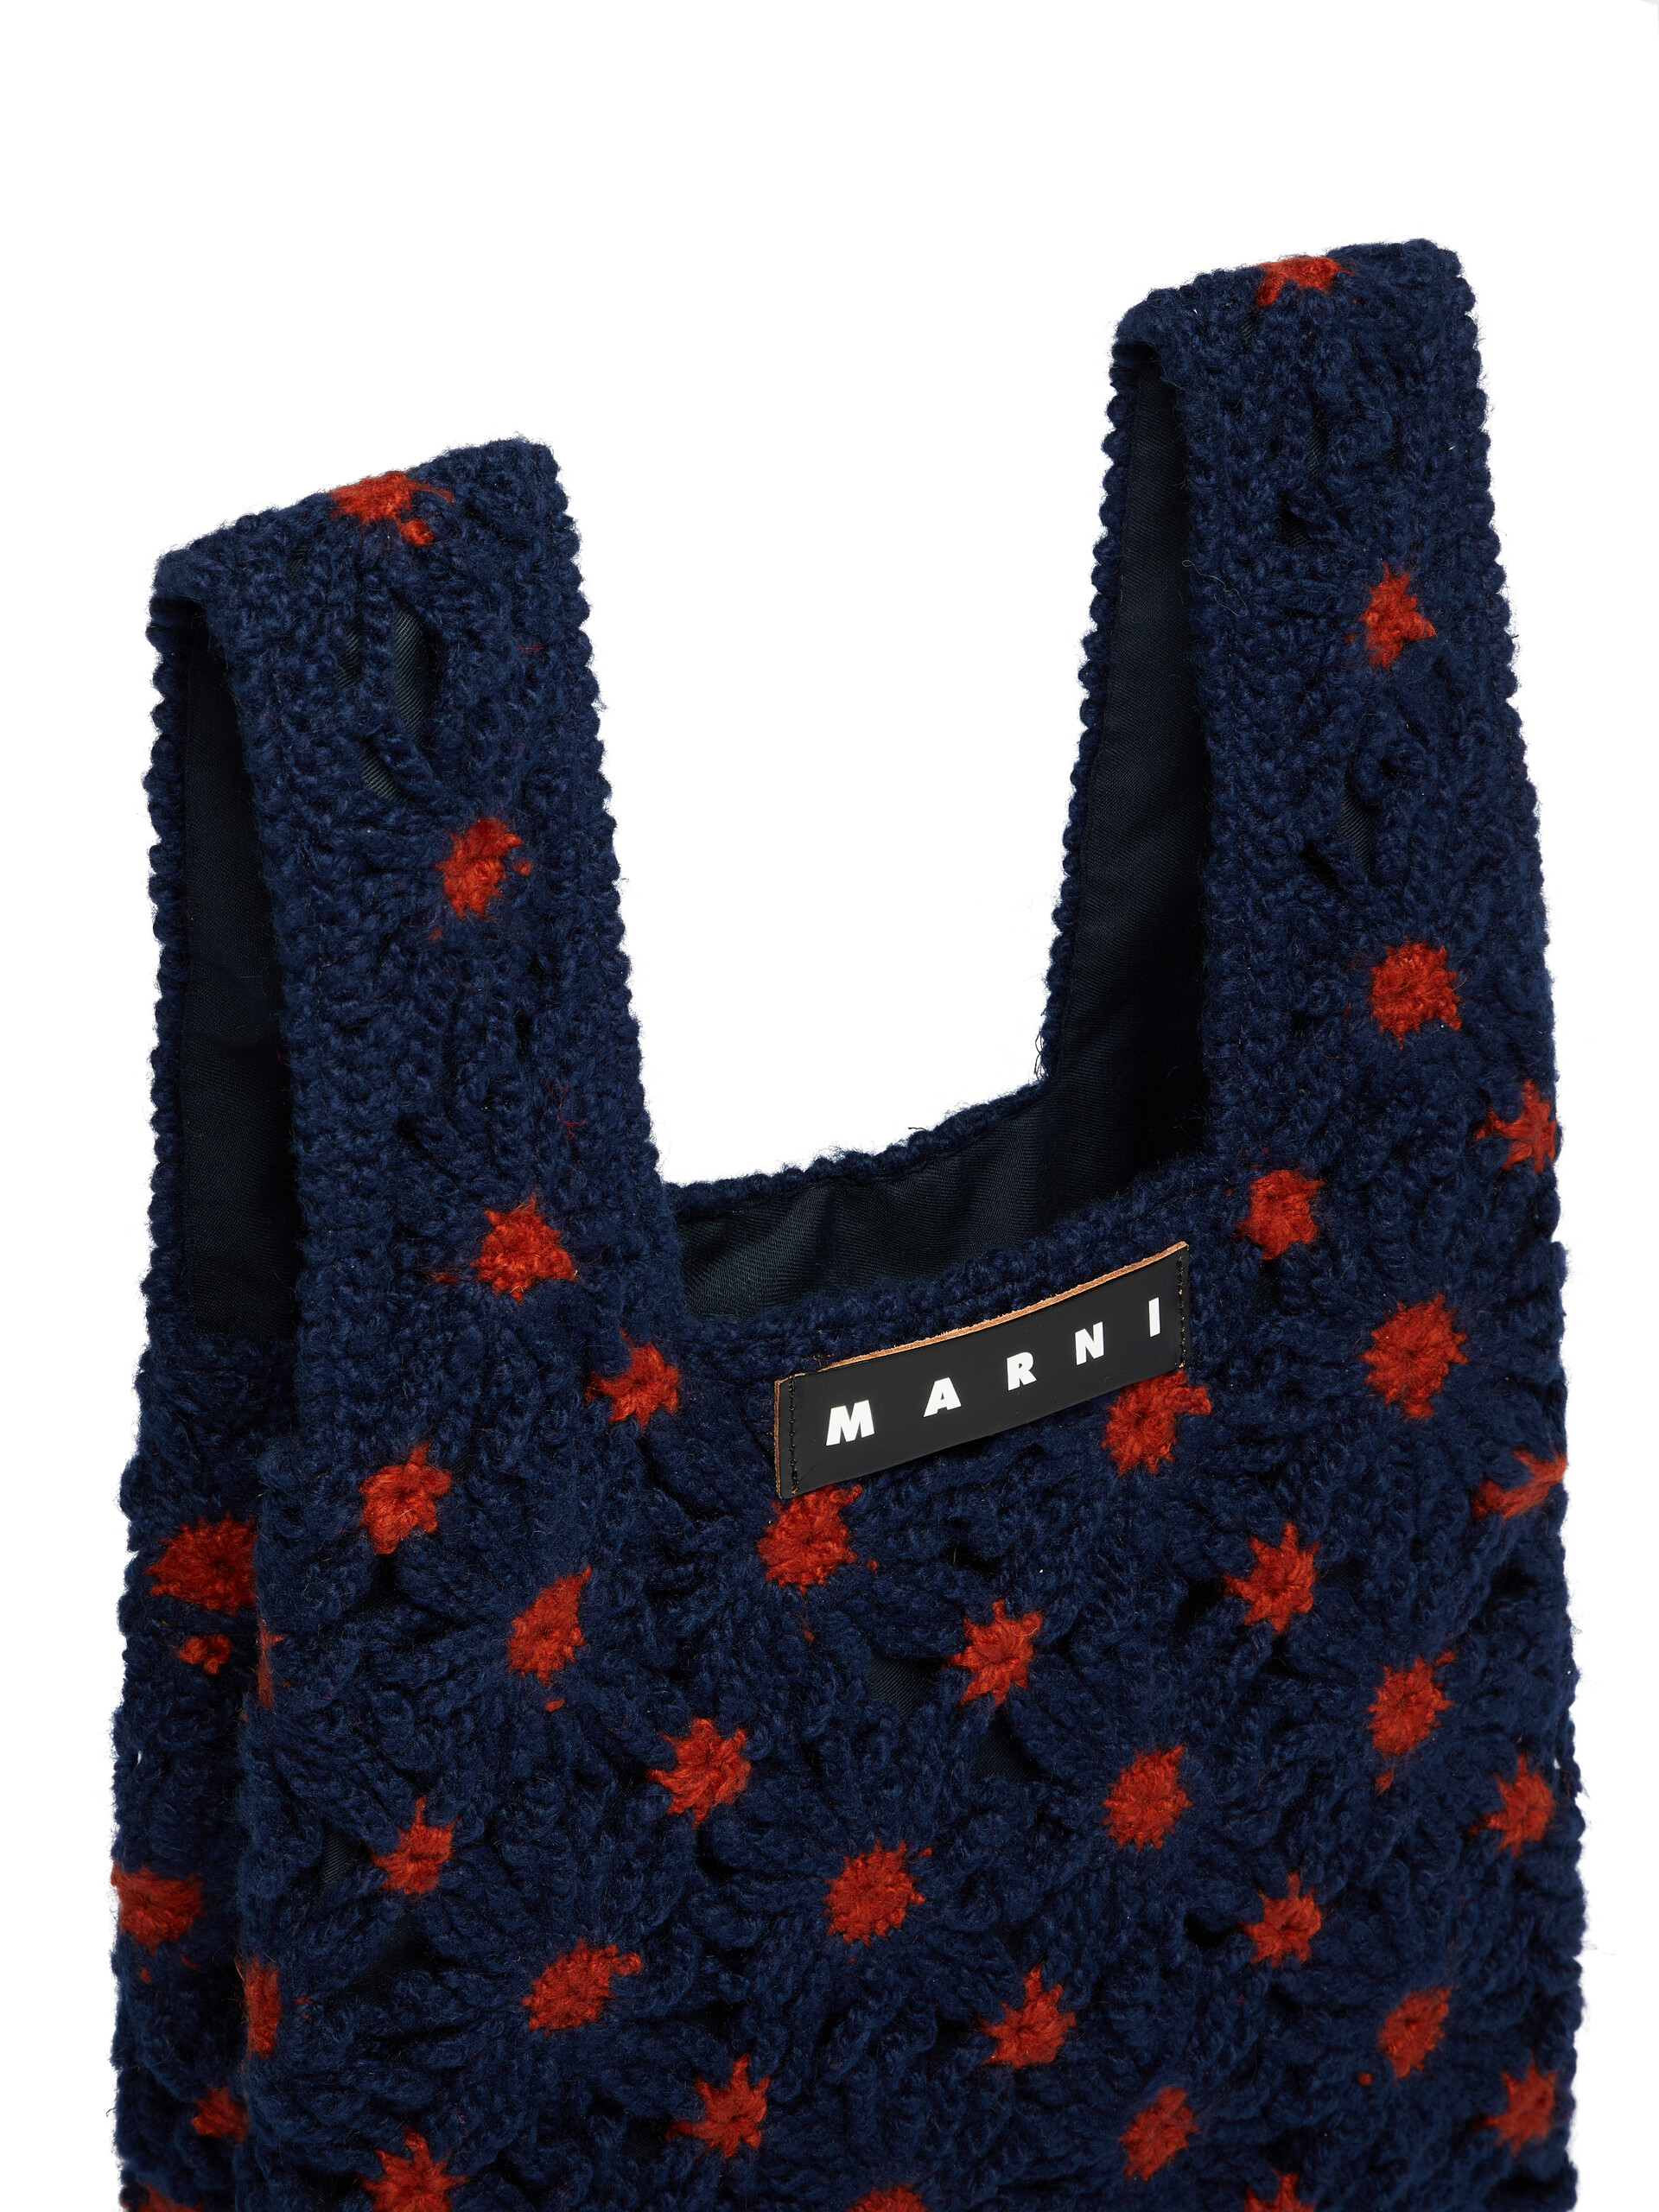 MARNI MARKET FISH bag in blue and red crochet - Bags - Image 4